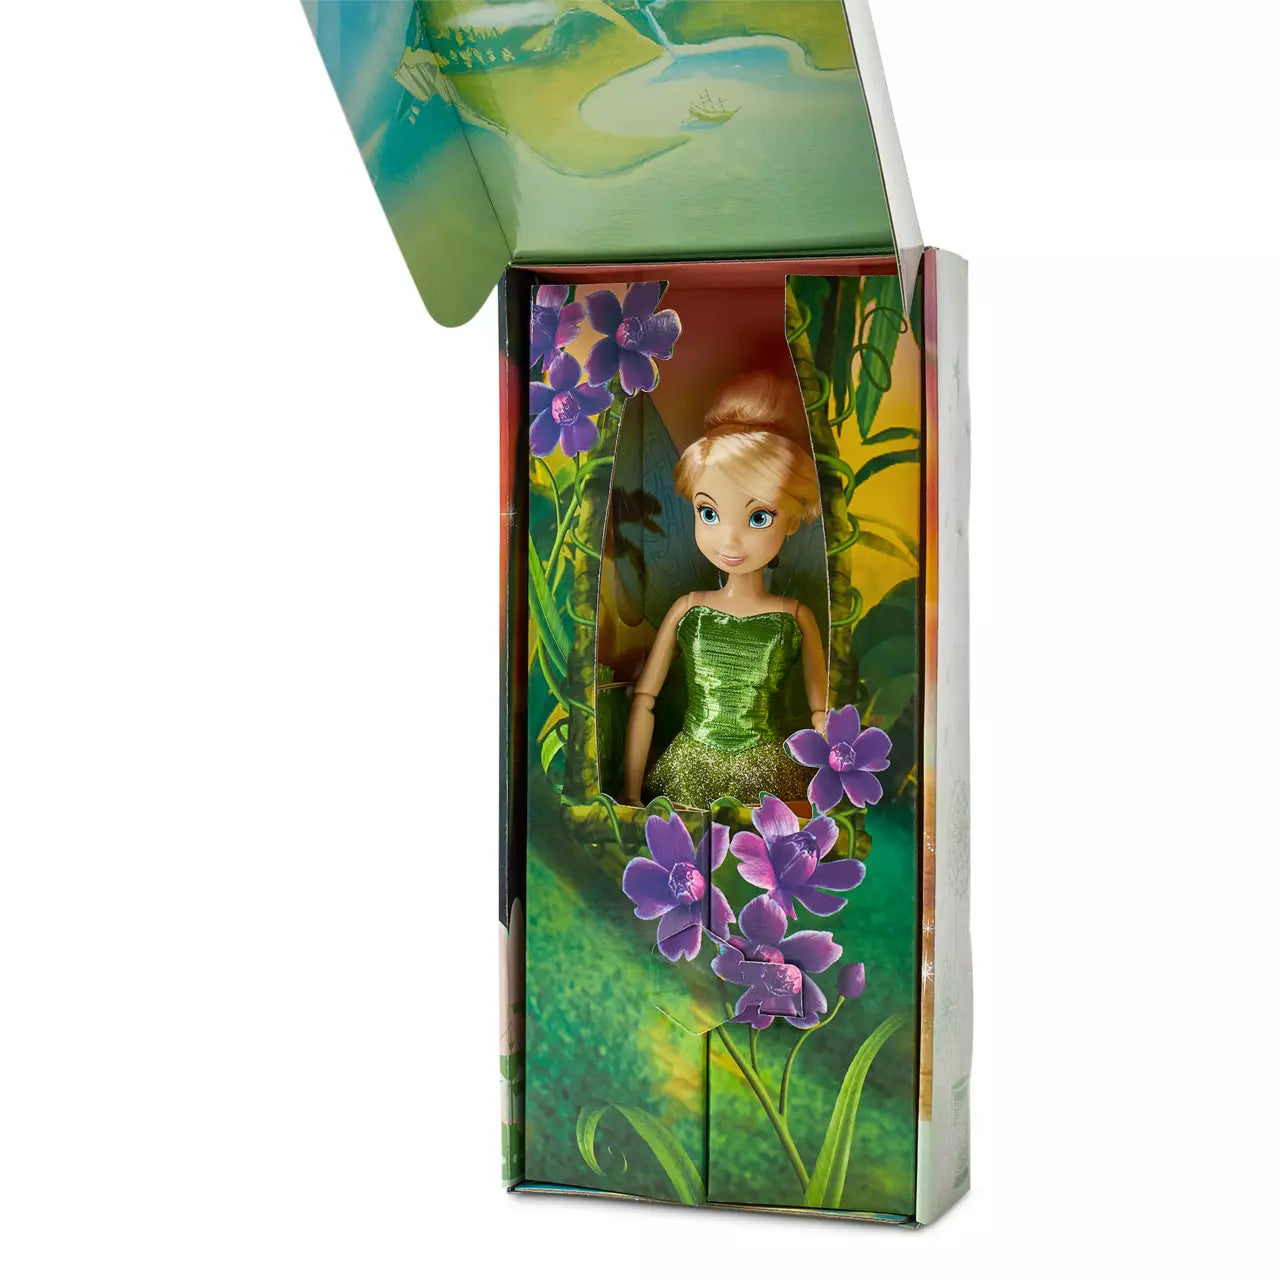 Tinker Bell Classic Doll – Peter Pan